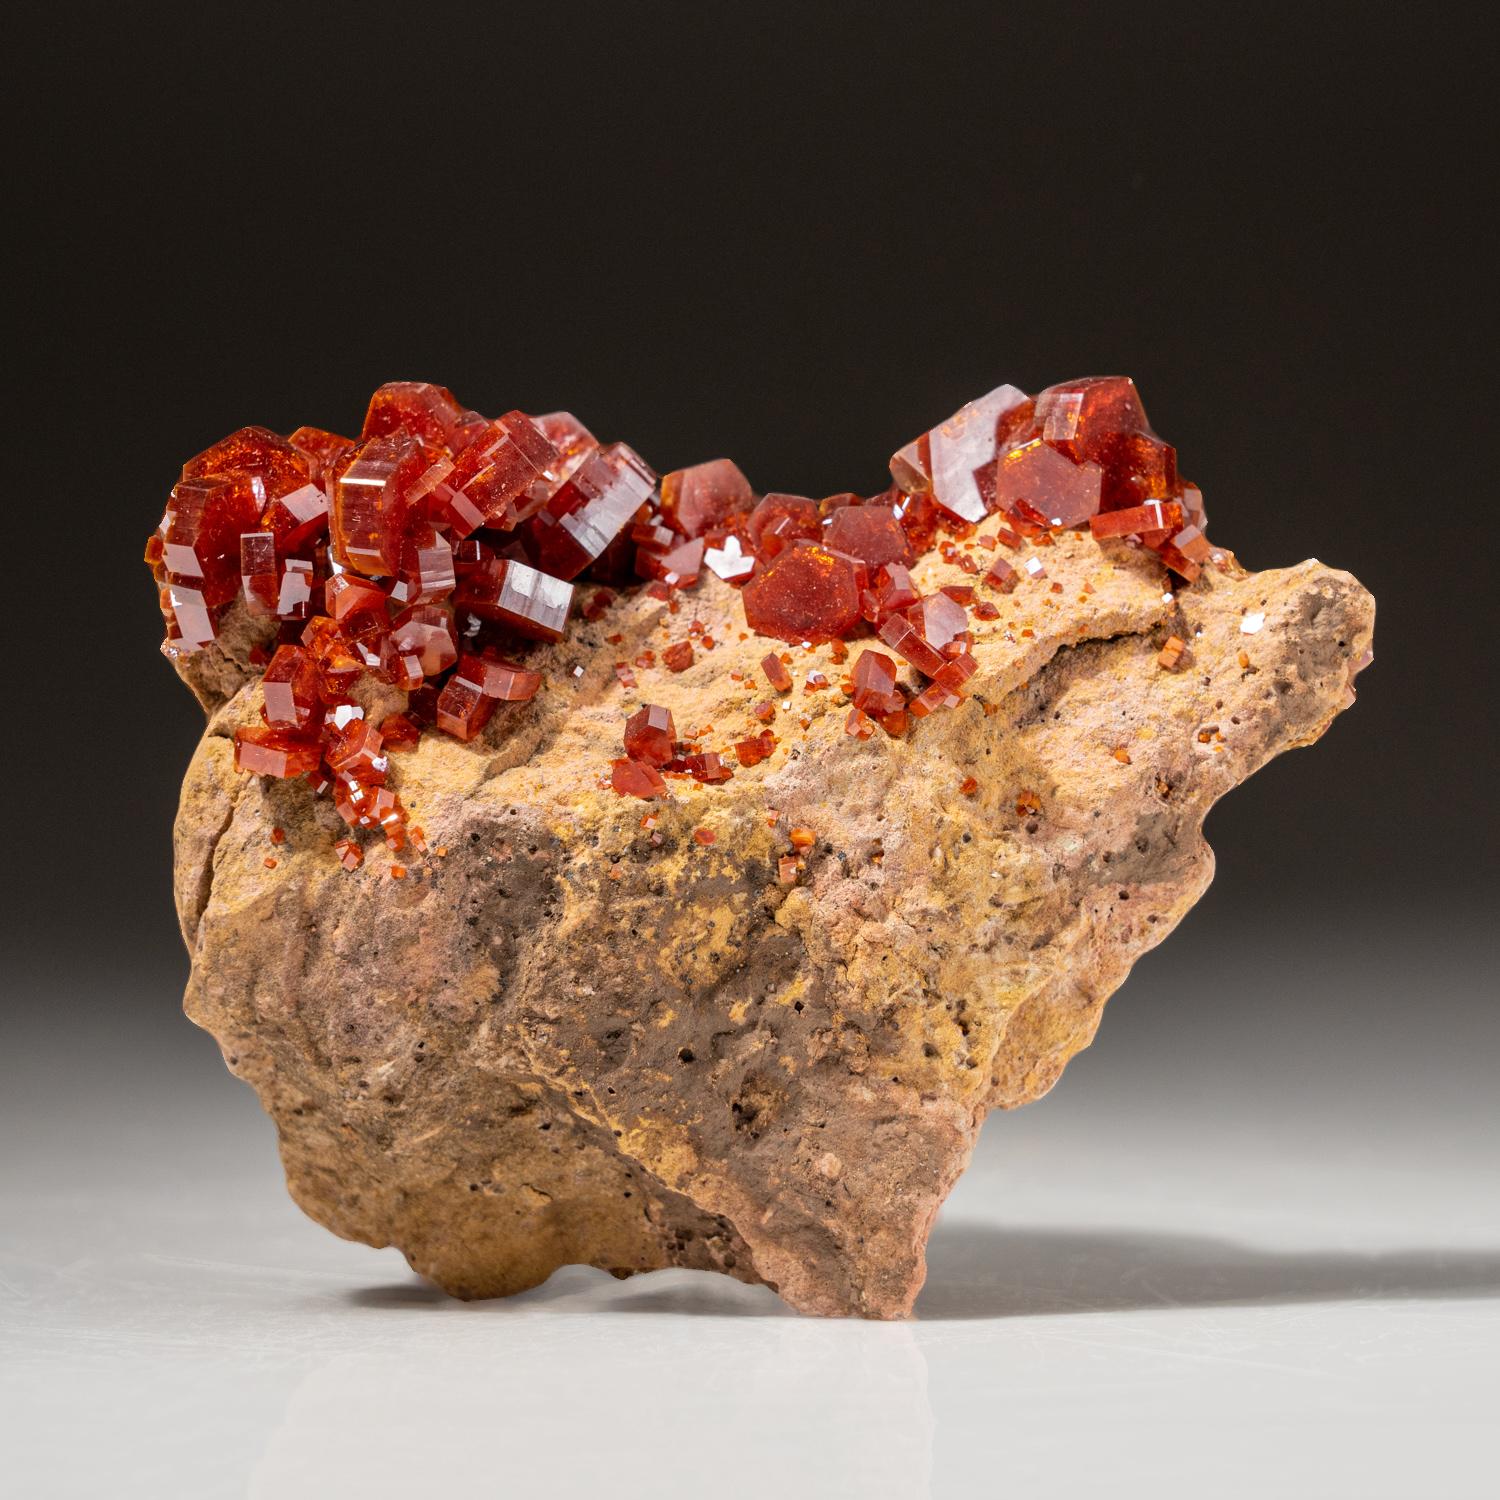 From Mibladen, Atlas Mountains, Khénifra Province, Morocco 

An exceptional world-class cluster of hexagonal brick-red Vanadinite crystals with glassy luster on limonite matrix.  These large well-defined and undamaged crystals, are fully terminated